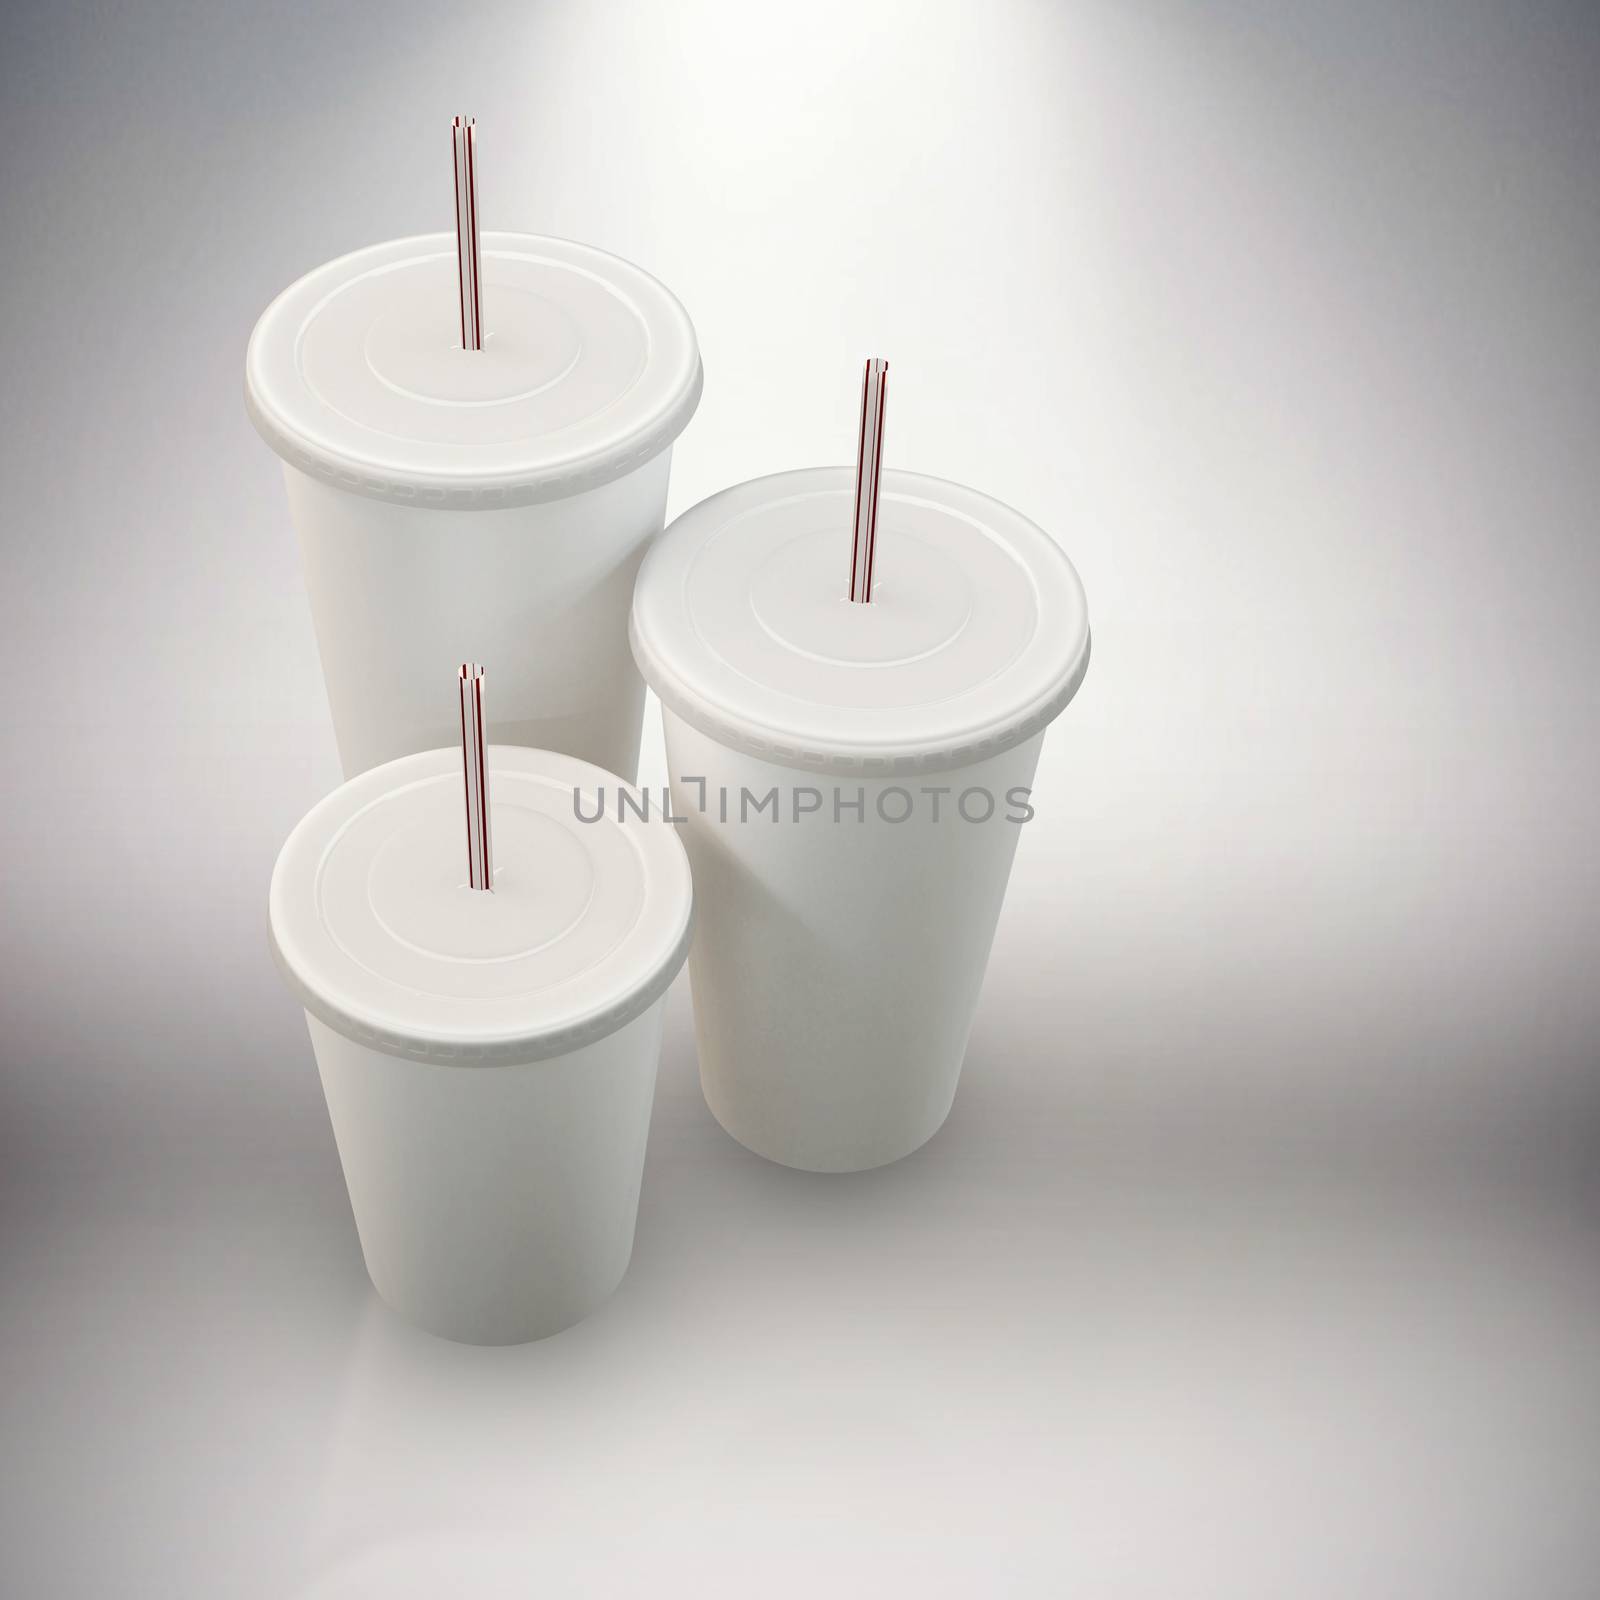 White cups over white background against grey background